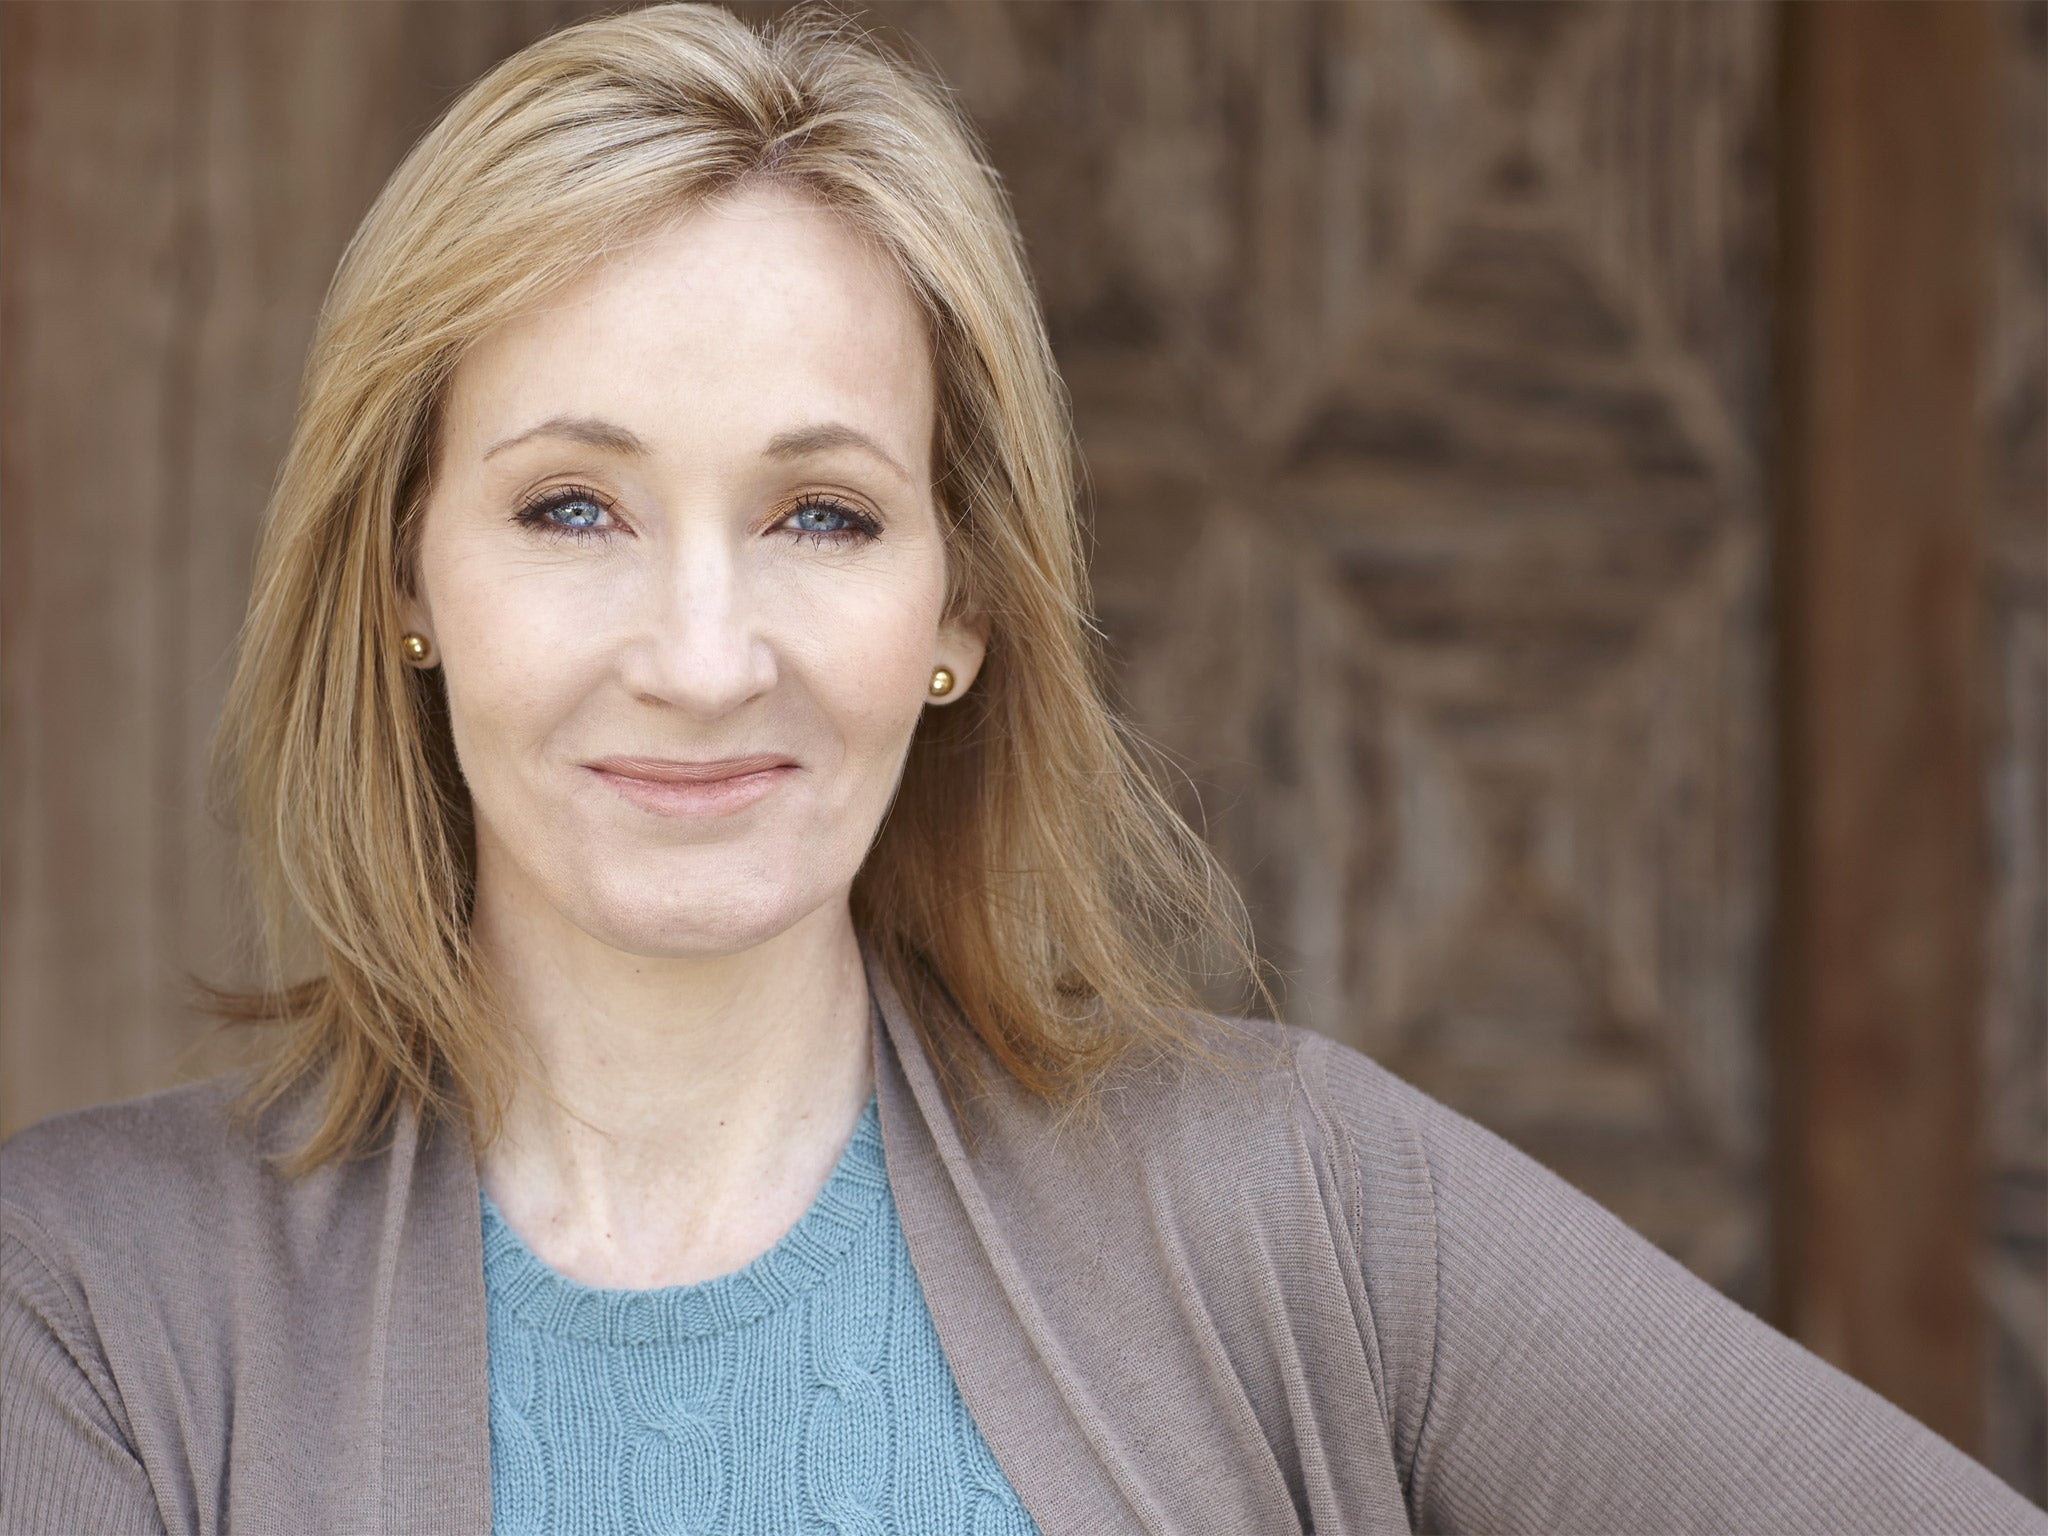 JK Rowling has released another 'story' on Pottermore